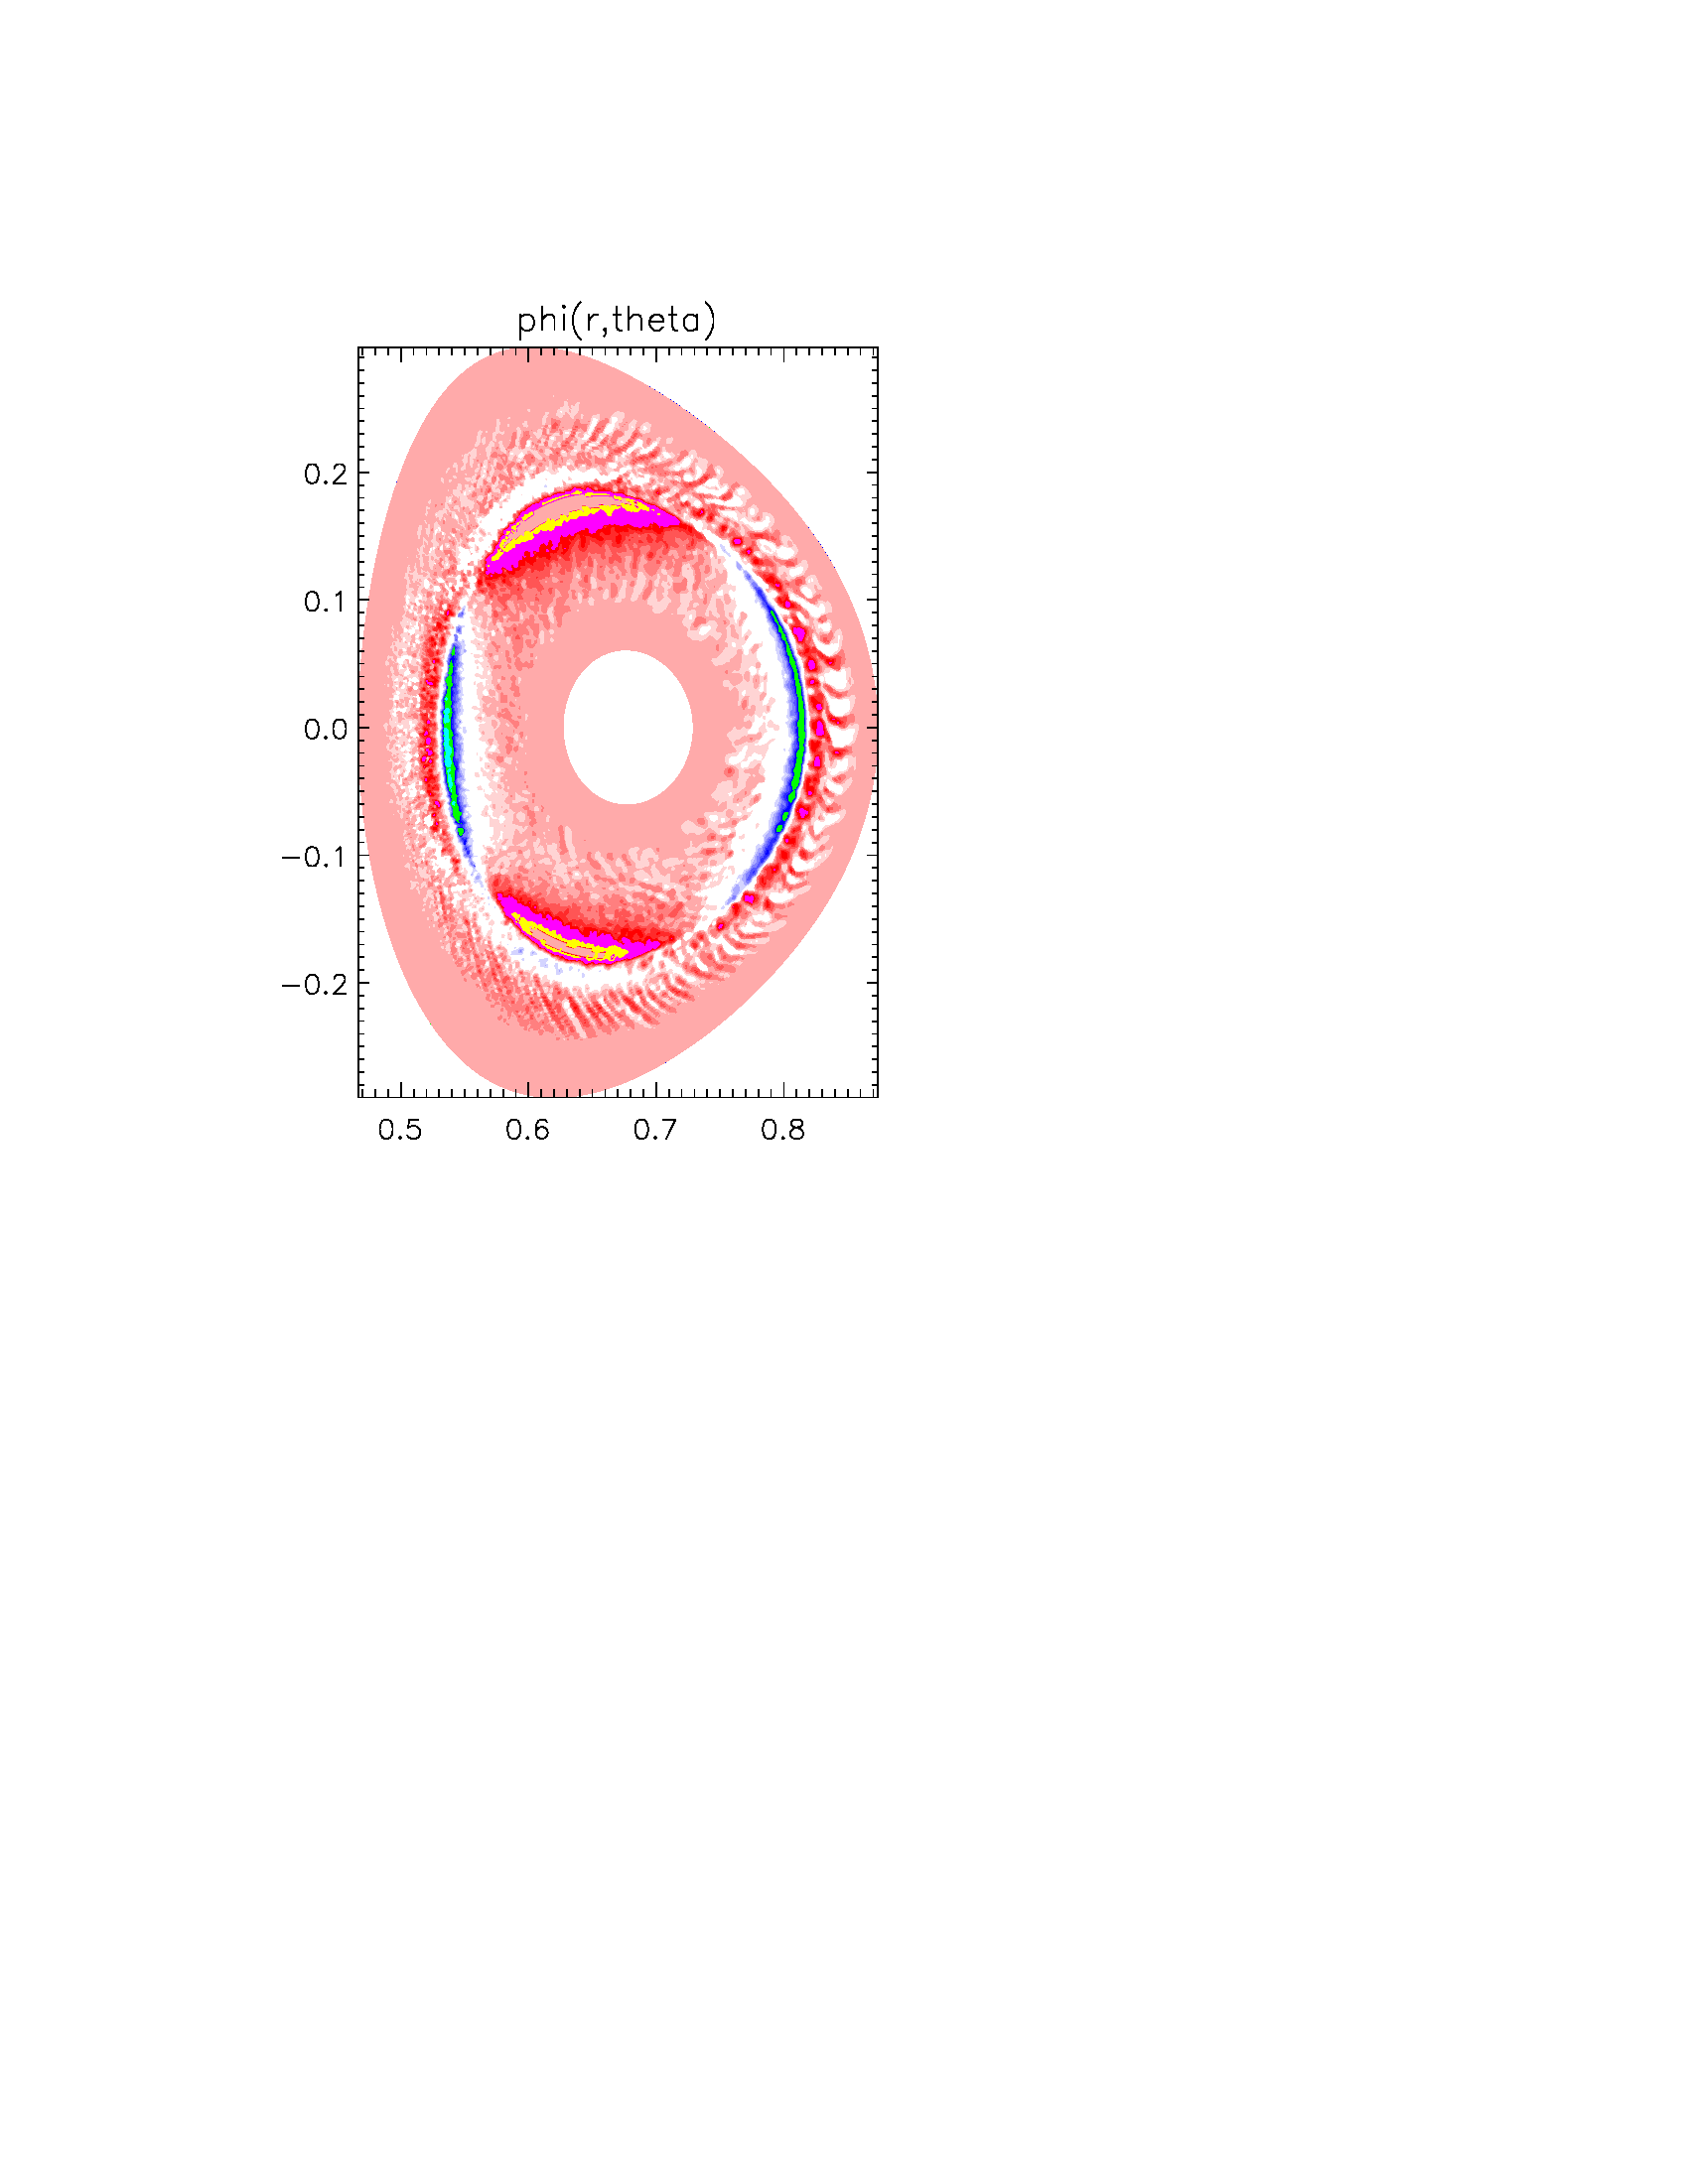 Contour plot of non-zonal potential, showing non-resonant 2/1 modes with much higher amplitude than turbulence.